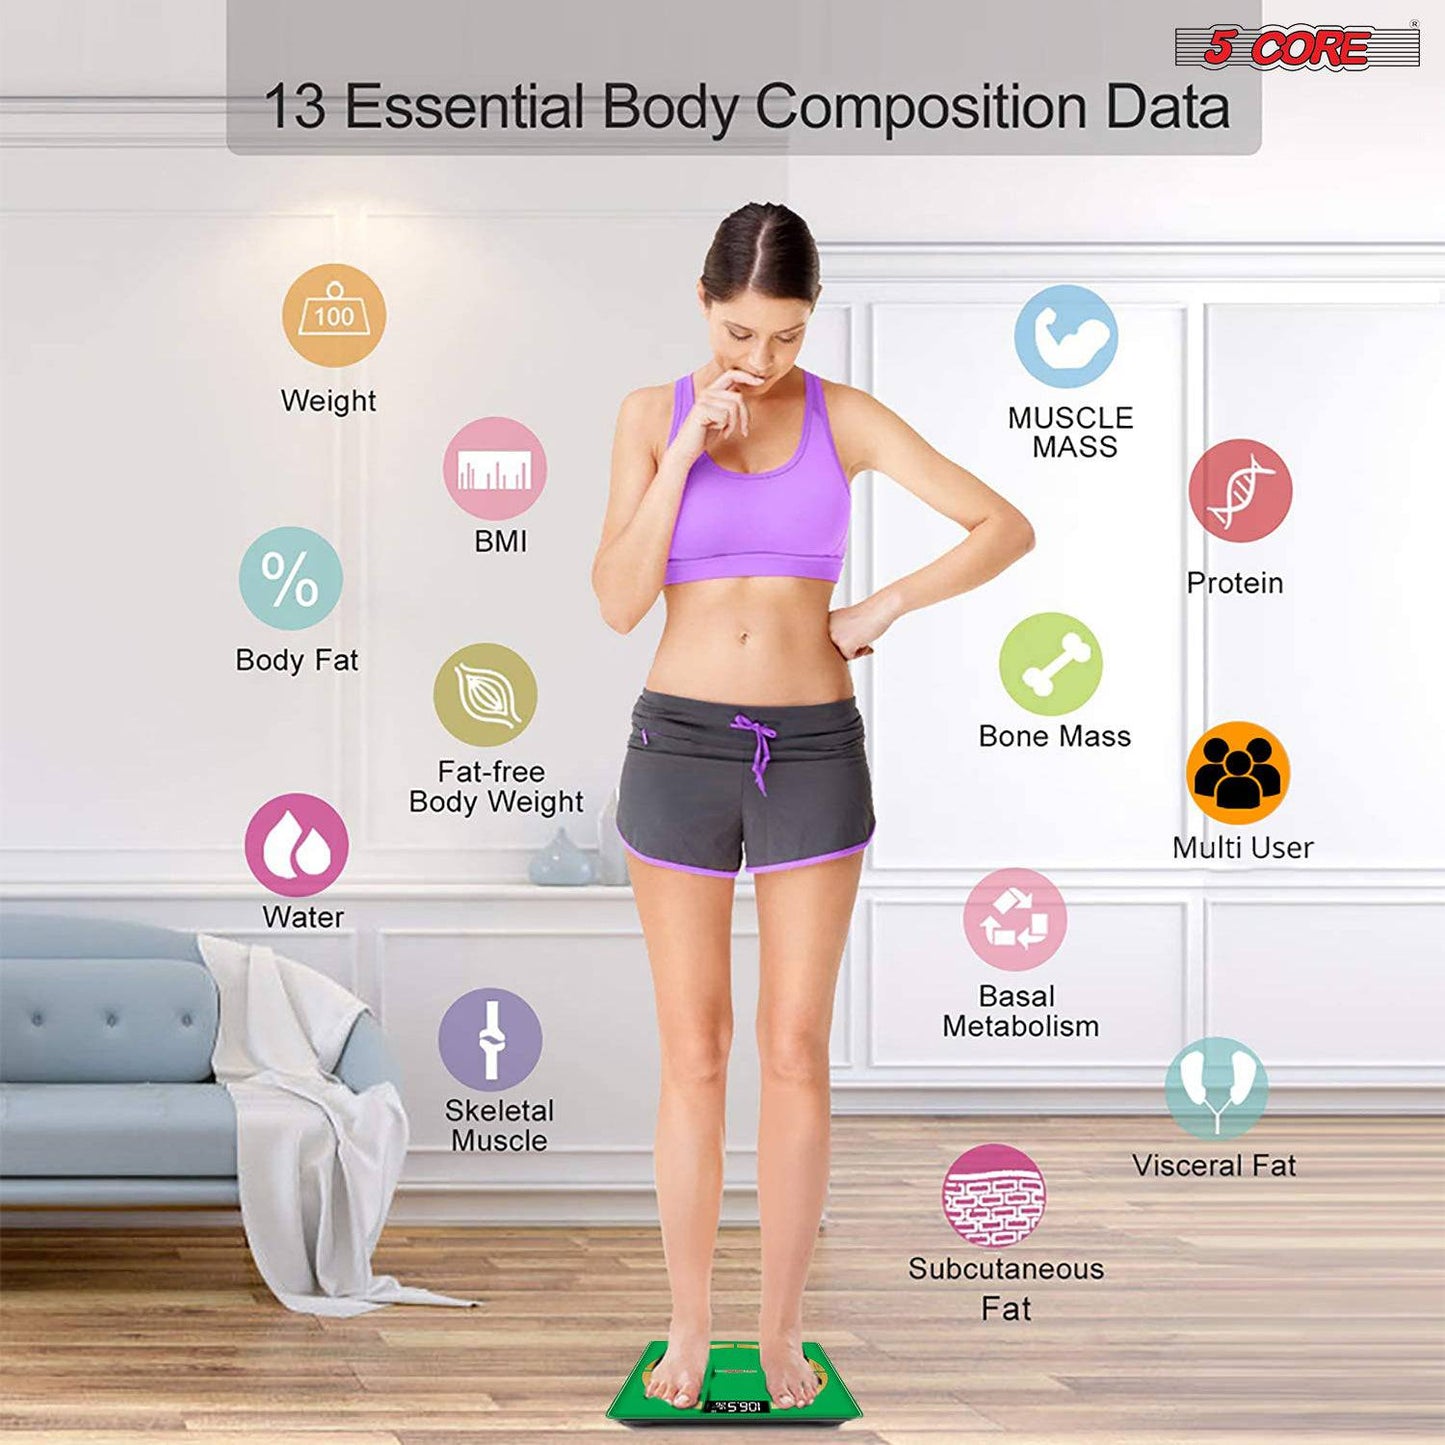 5Core Digital Bathroom Scale for Body Weight Fat Smart Bluetooth Rechargeable BBS 03 B SG